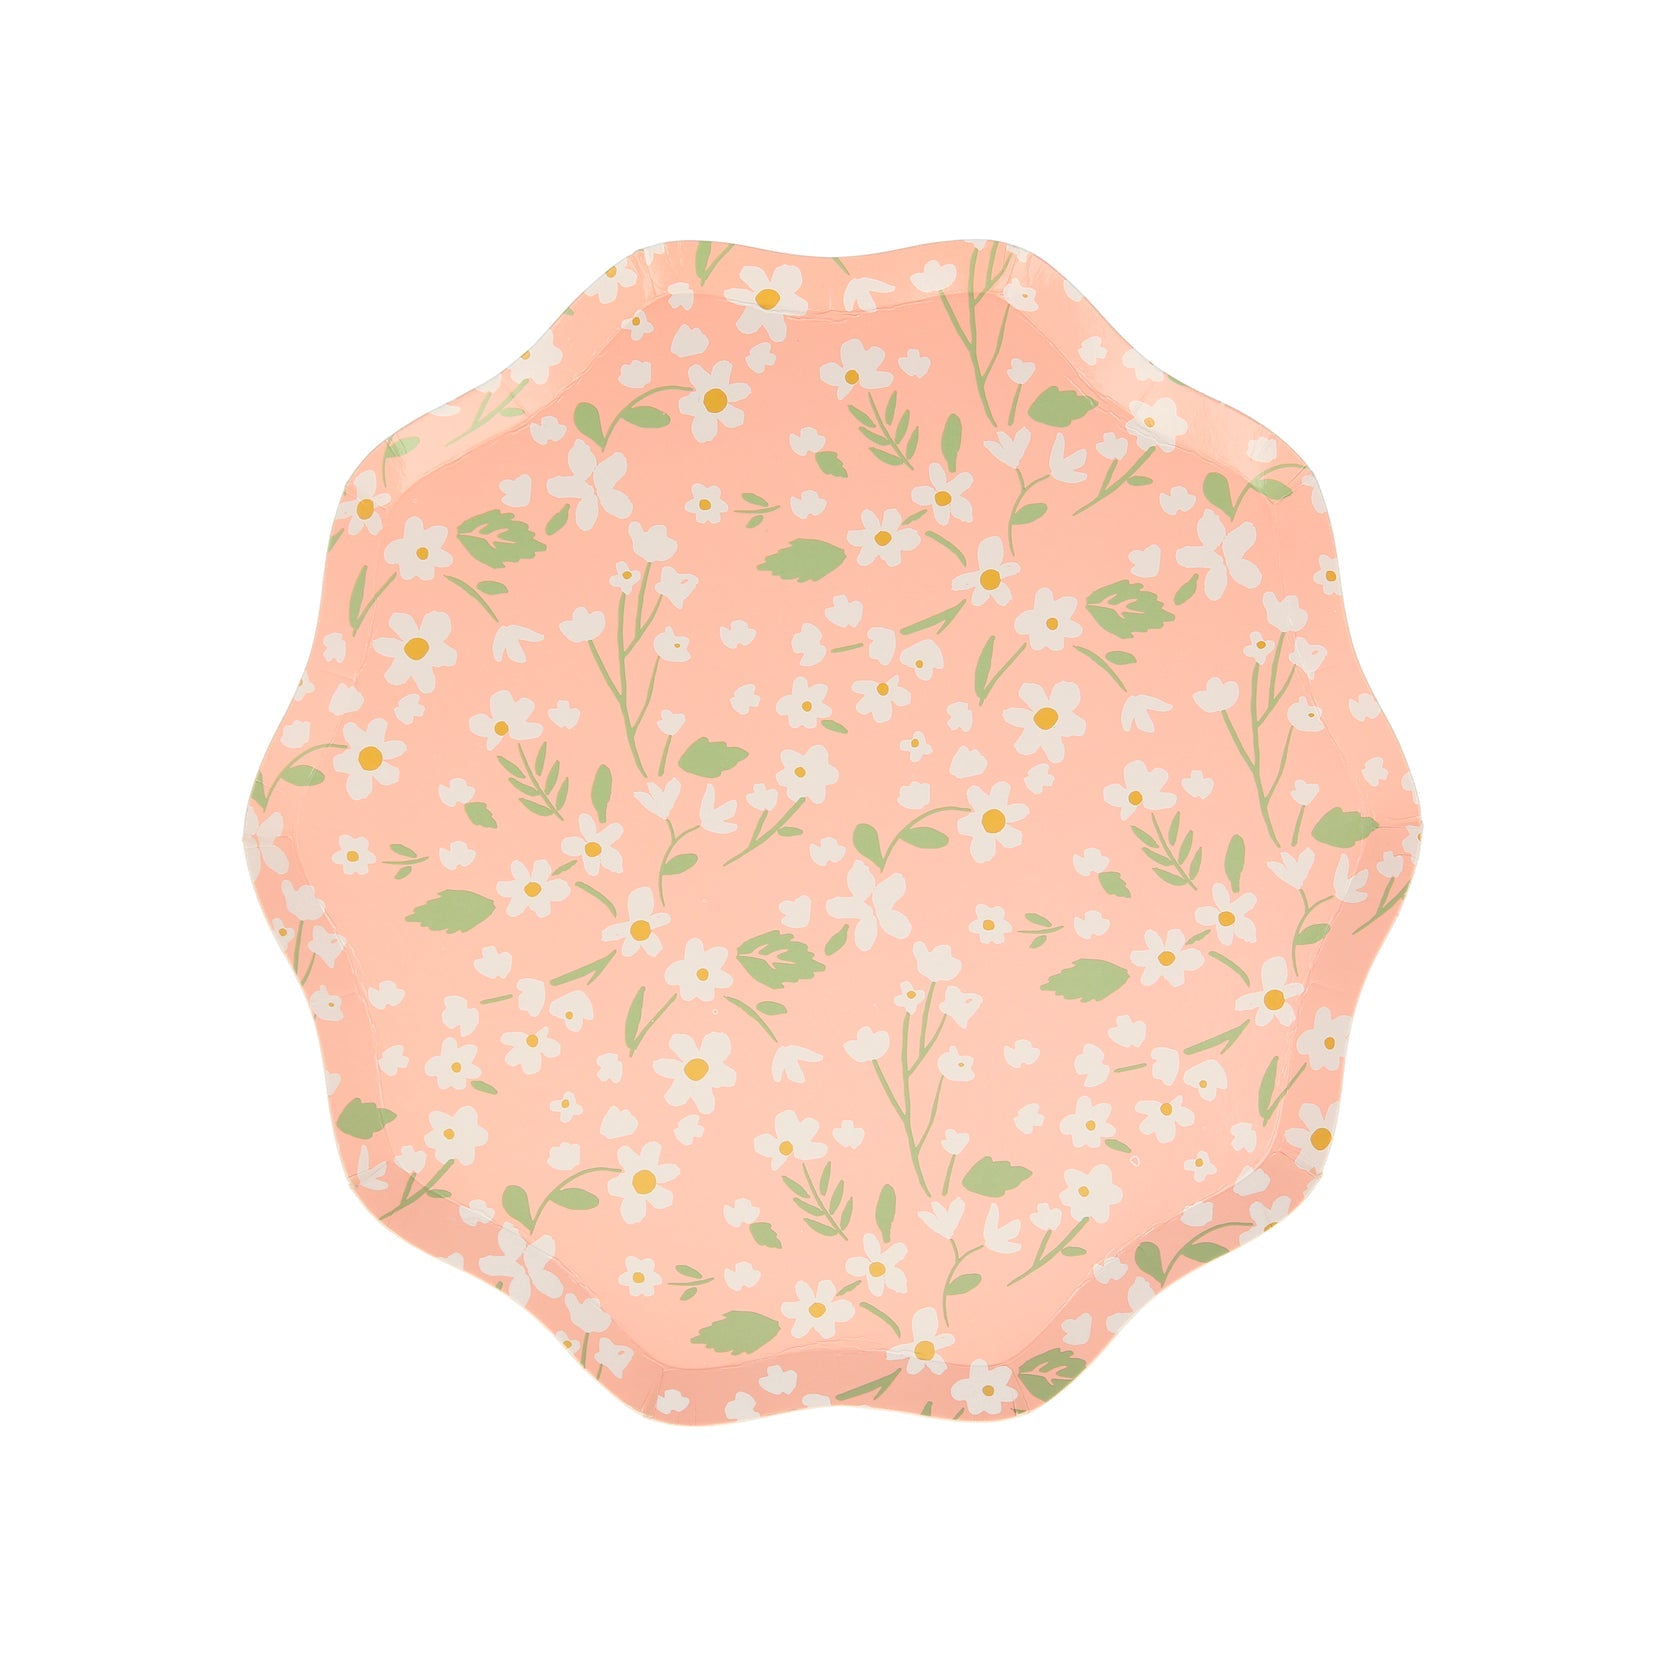 A set of four Ditsy Floral Plates with a floral pattern of daisies on them by Meri Meri.